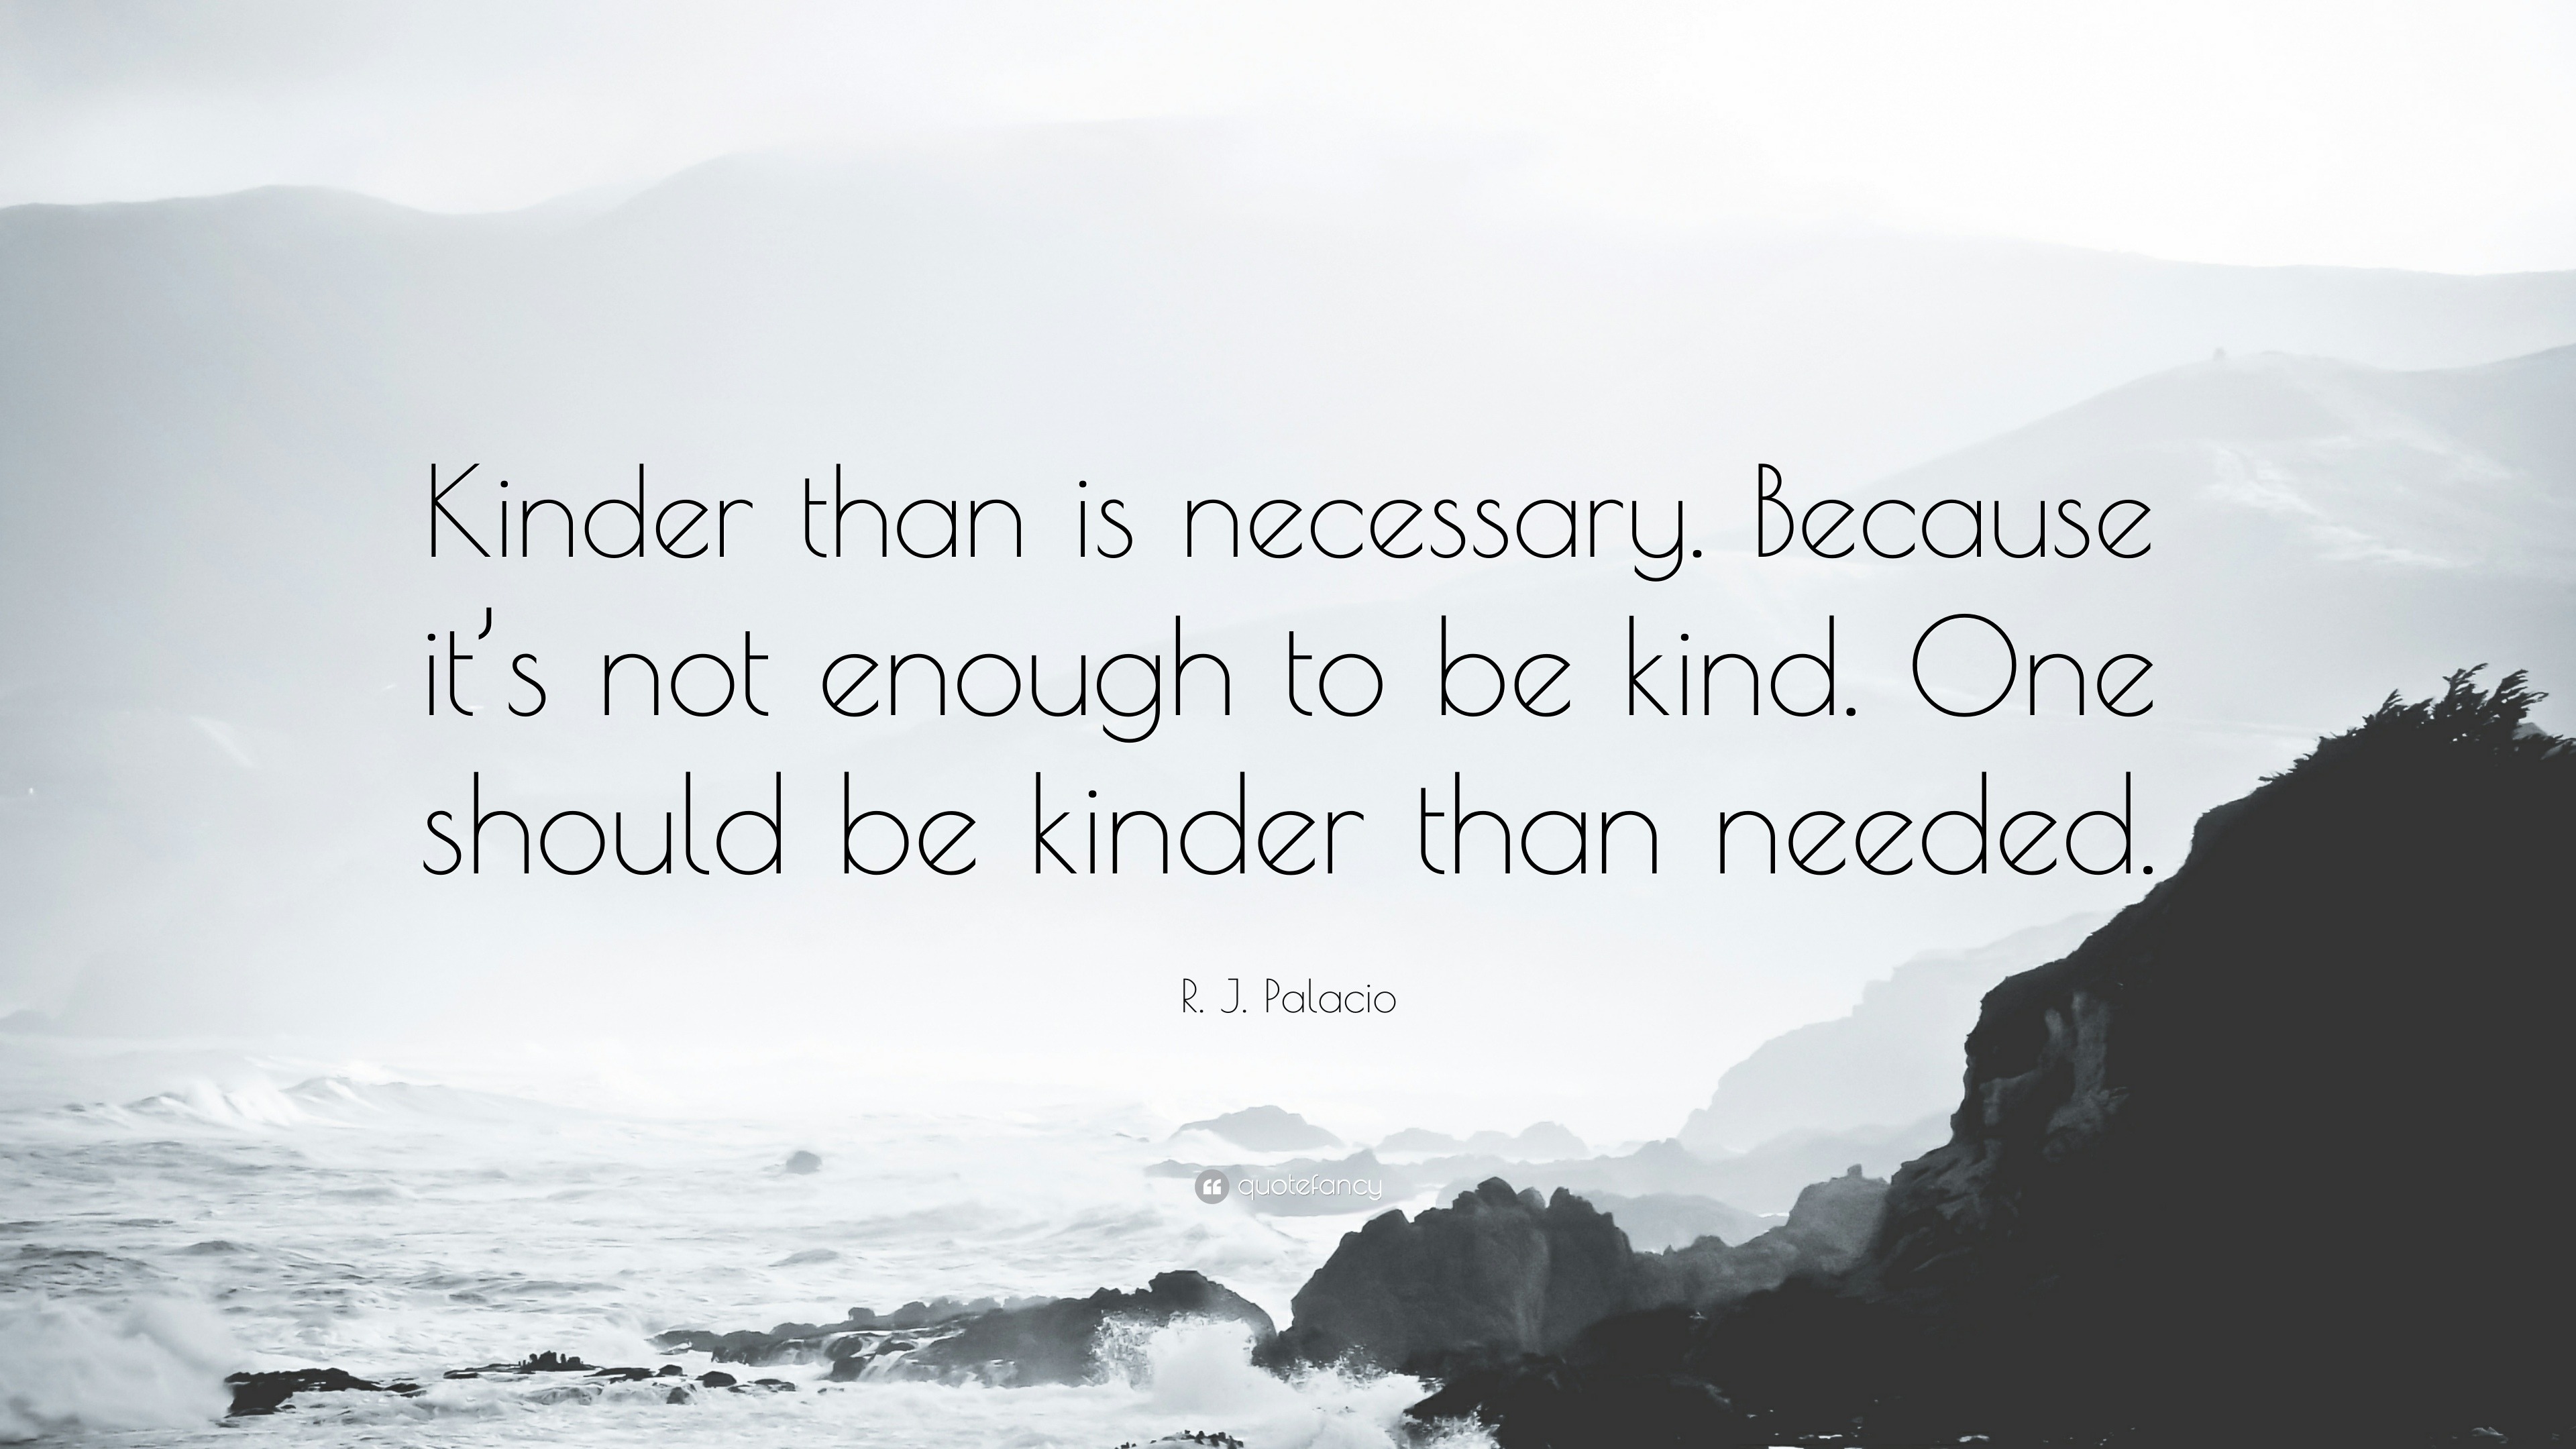 R. J. Palacio Quote: "Kinder than is necessary. Because it ...